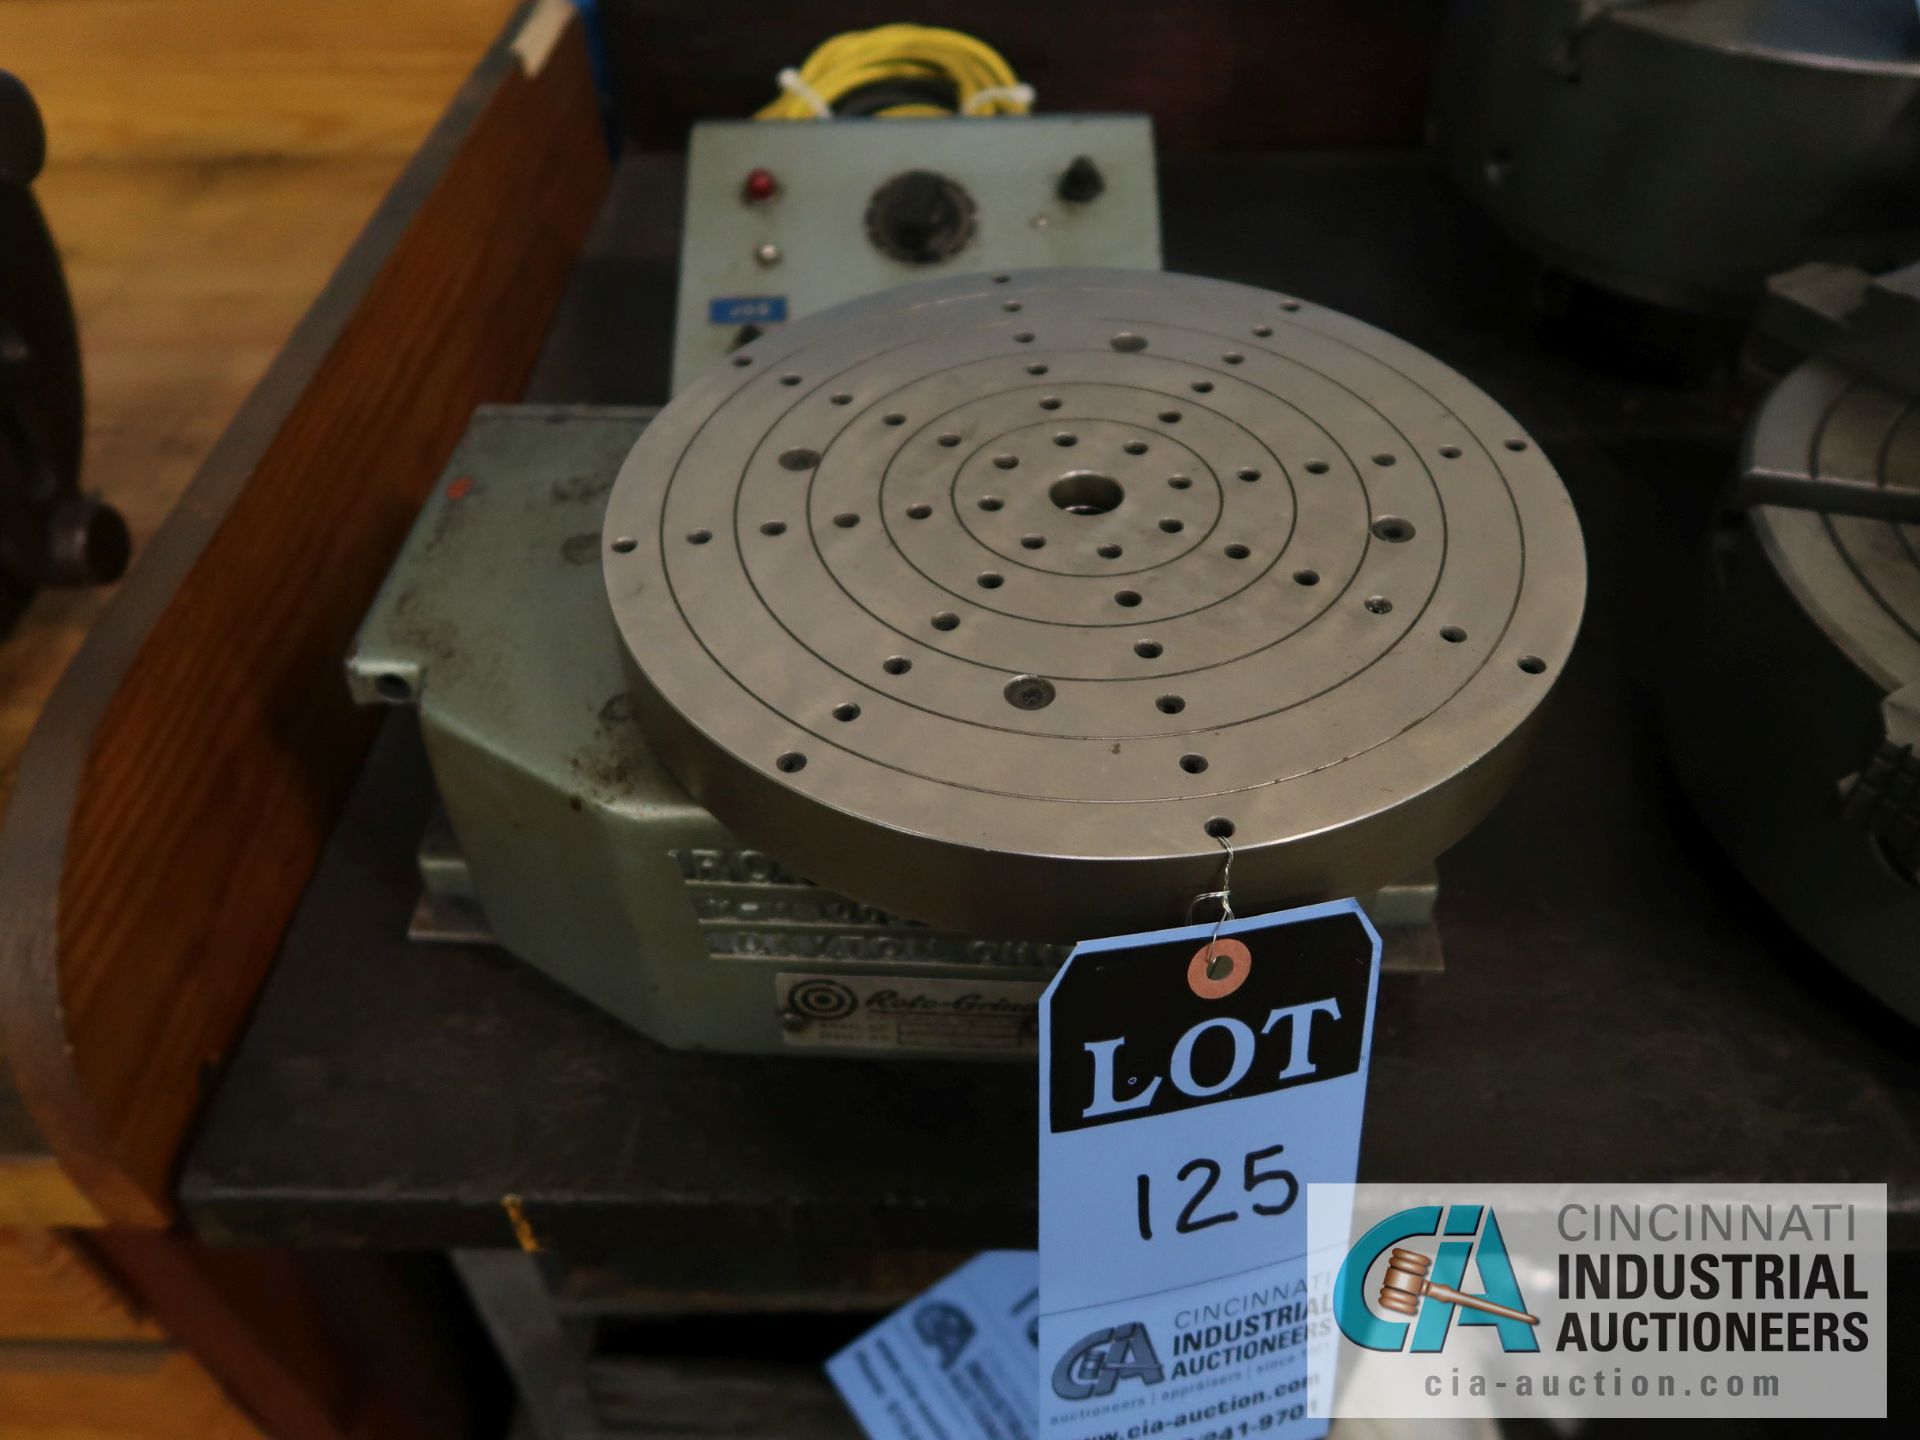 10" ROTO-GRIND MODEL 307-V ELECTRIC ROTARY TABLE WITH VARIABLE SPEED CONTROL